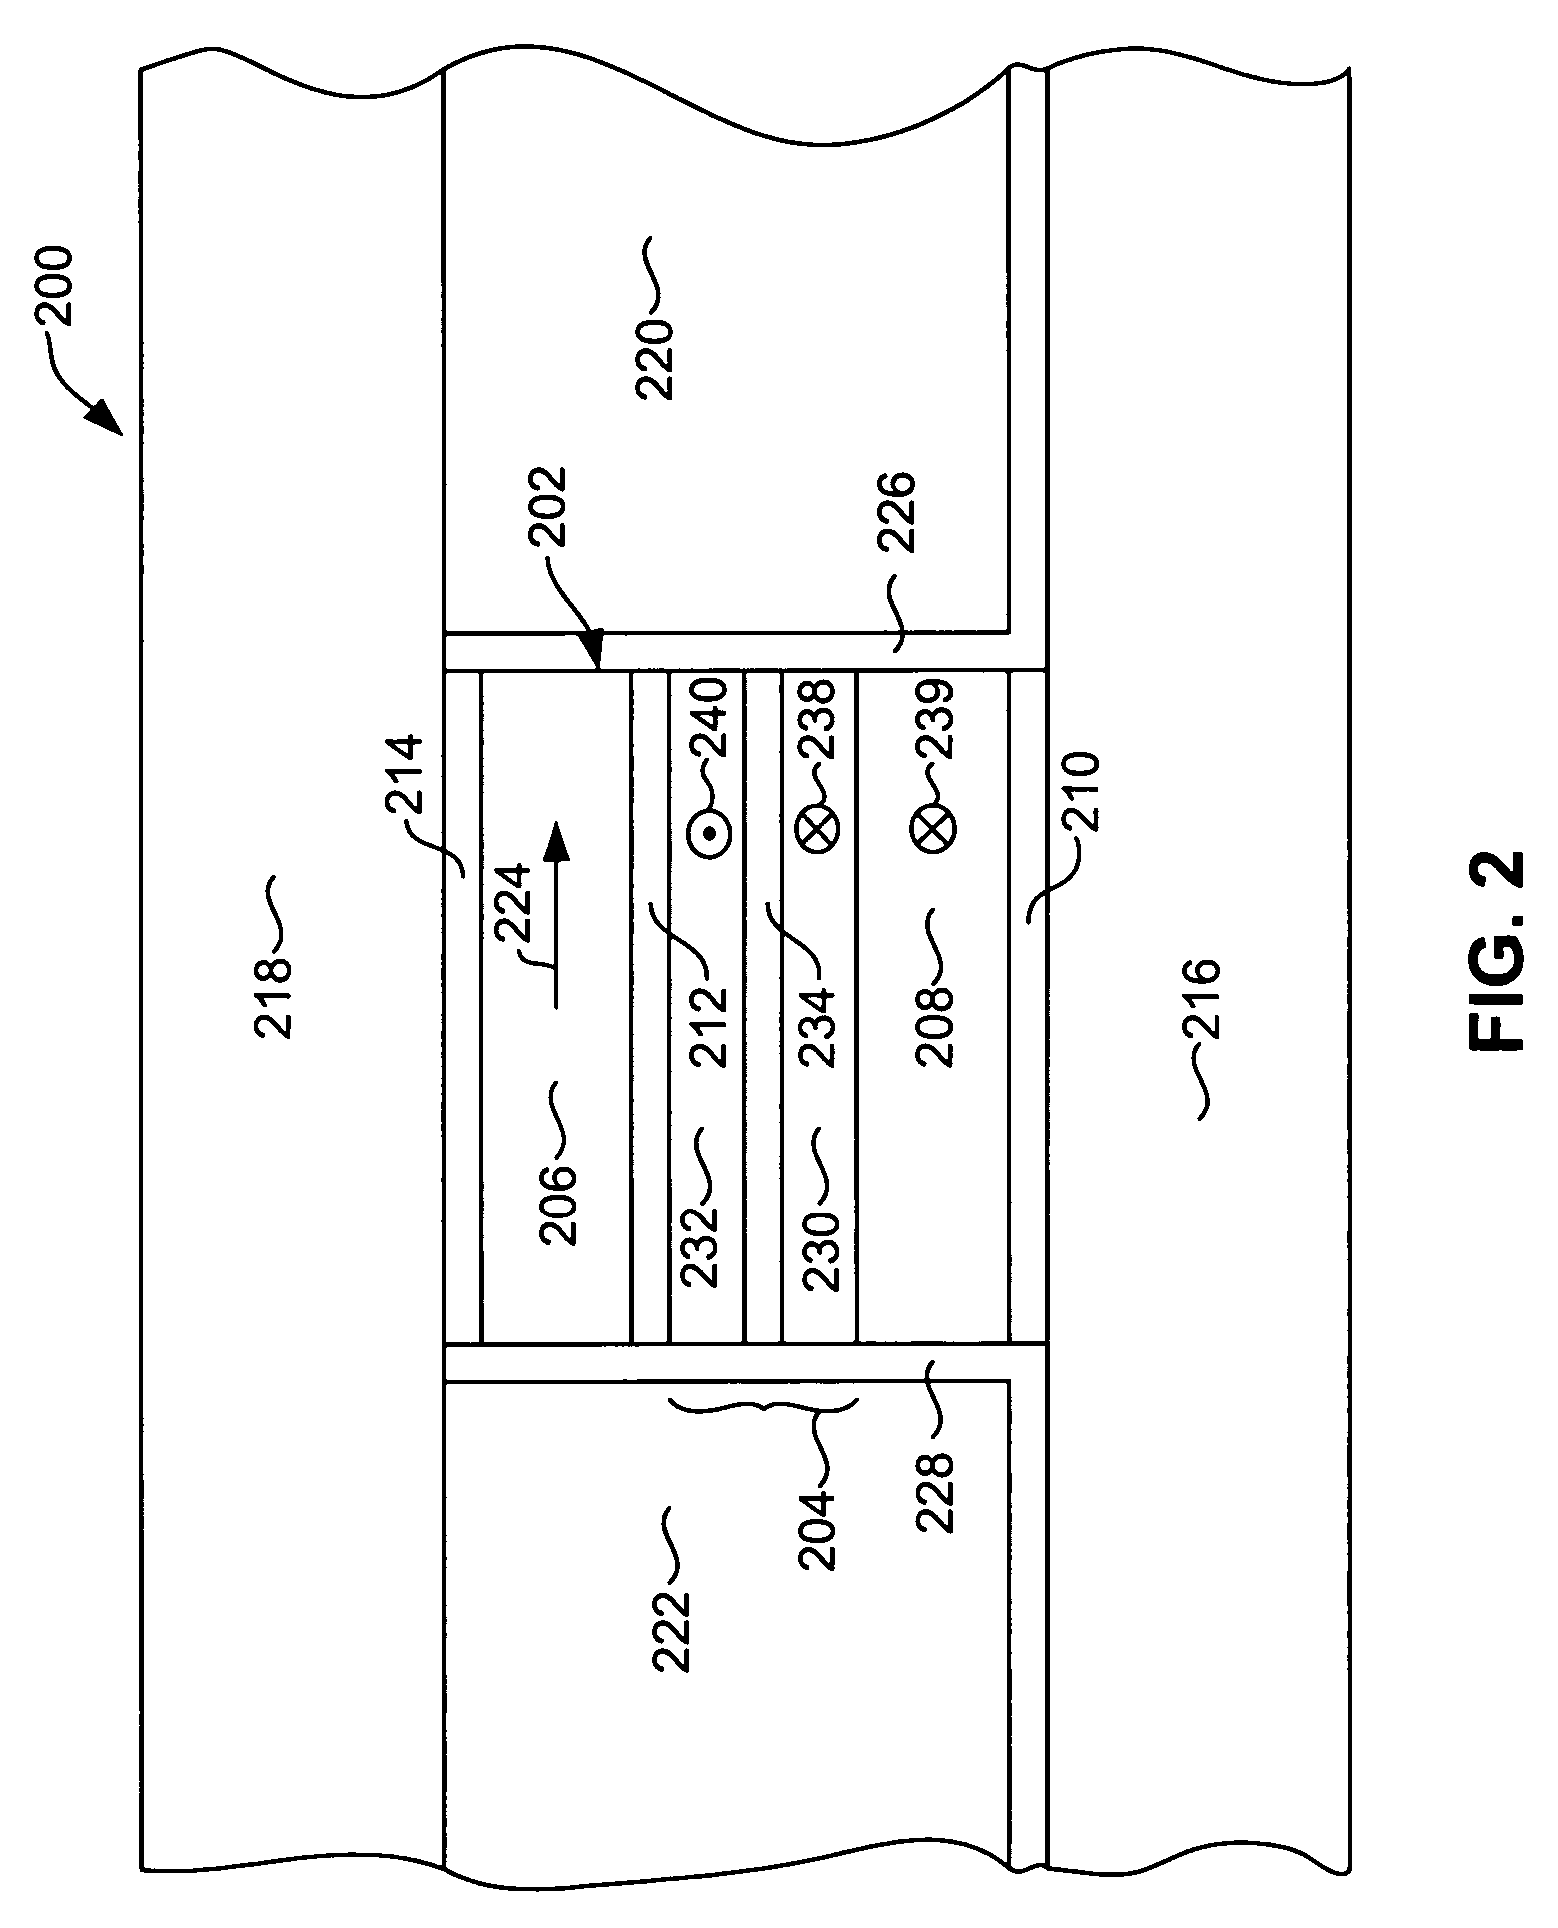 Method for manufacturing a magnetic read sensor employing oblique etched underlayers for inducing uniaxial magnetic anisotropy in a hard magnetic pinning layer